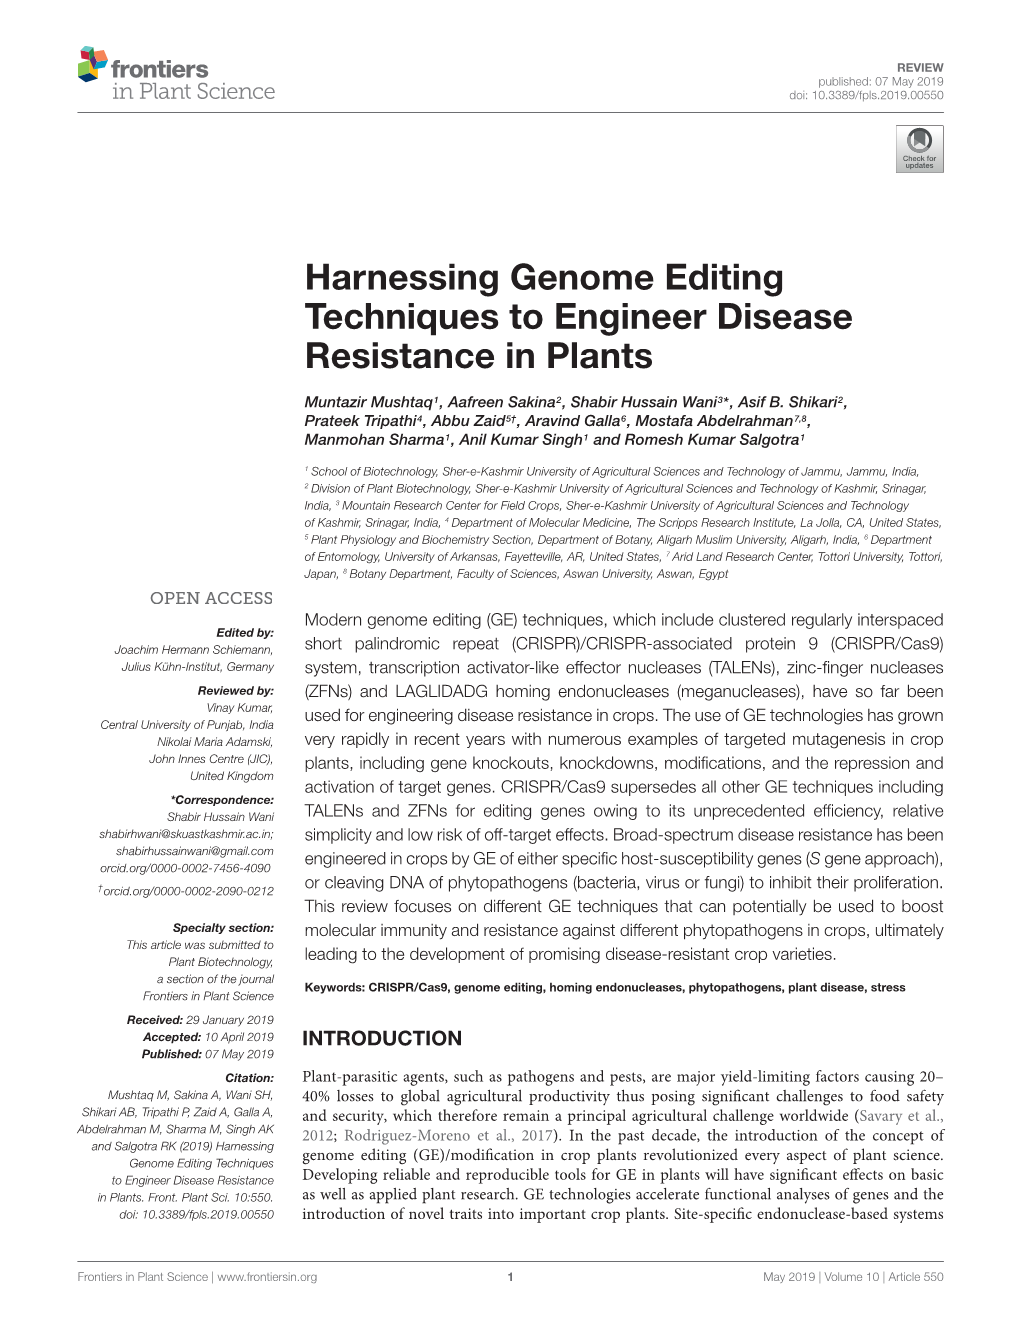 Harnessing Genome Editing Techniques to Engineer Disease Resistance in Plants